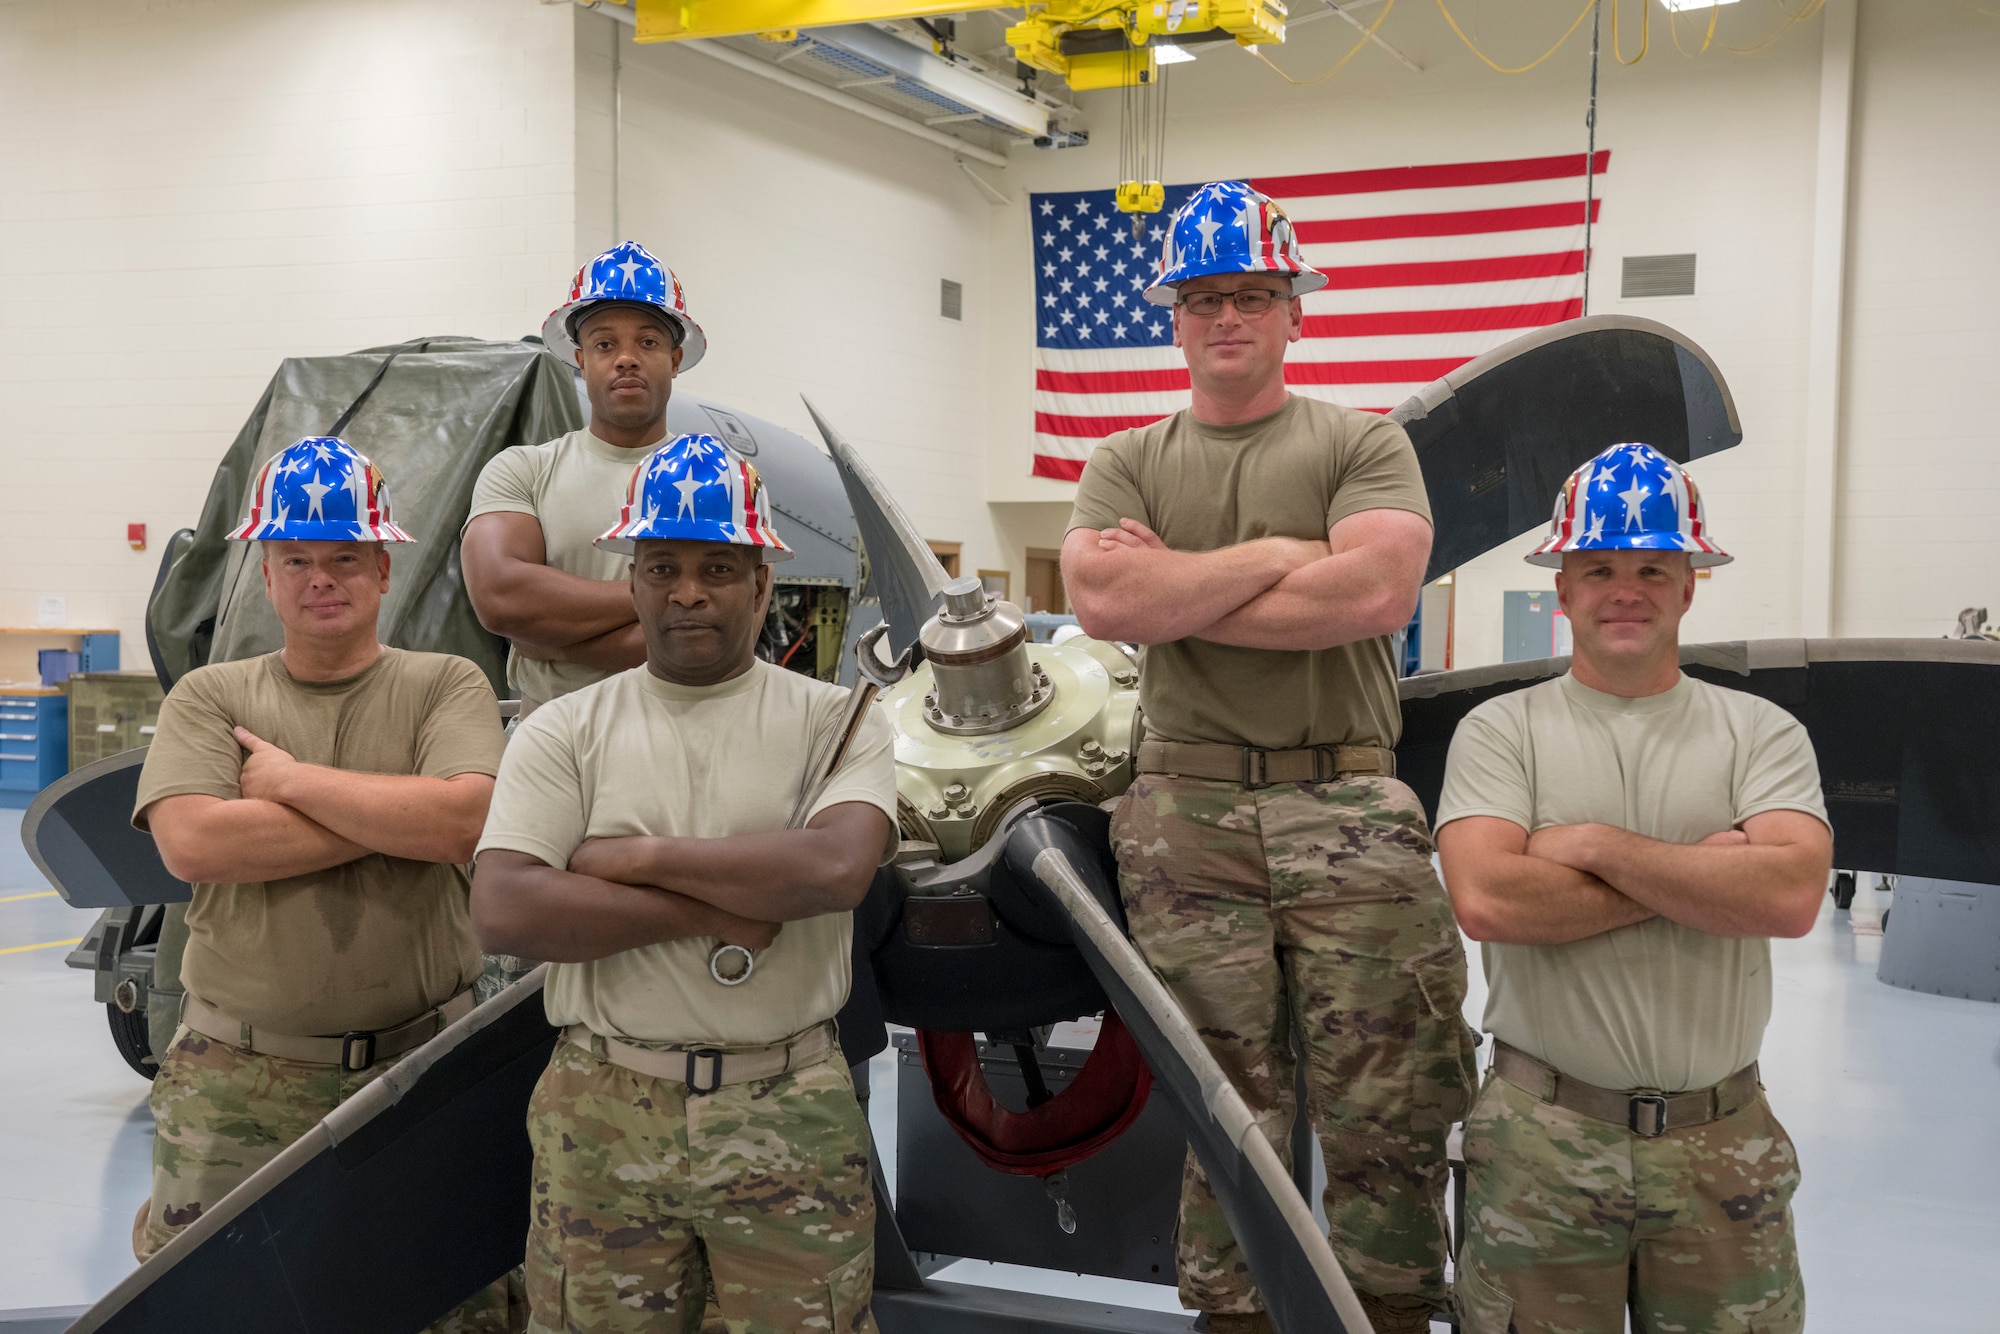 From left to right: Tech. Sgt. Christopher Botts, Staff Sgt. Robert Ricks, Master Sgt. Donald Maloid, Tech. Sgt. Jason Napointek and Master Sgt. Ronnie Graham work in the 403rd Aircraft Maintenance Squadron as aerospace propulsion technicians at Keesler Air Force Base, Mississippi. (U.S. Air Force photo by Tech. Sgt. Christopher Carranza)